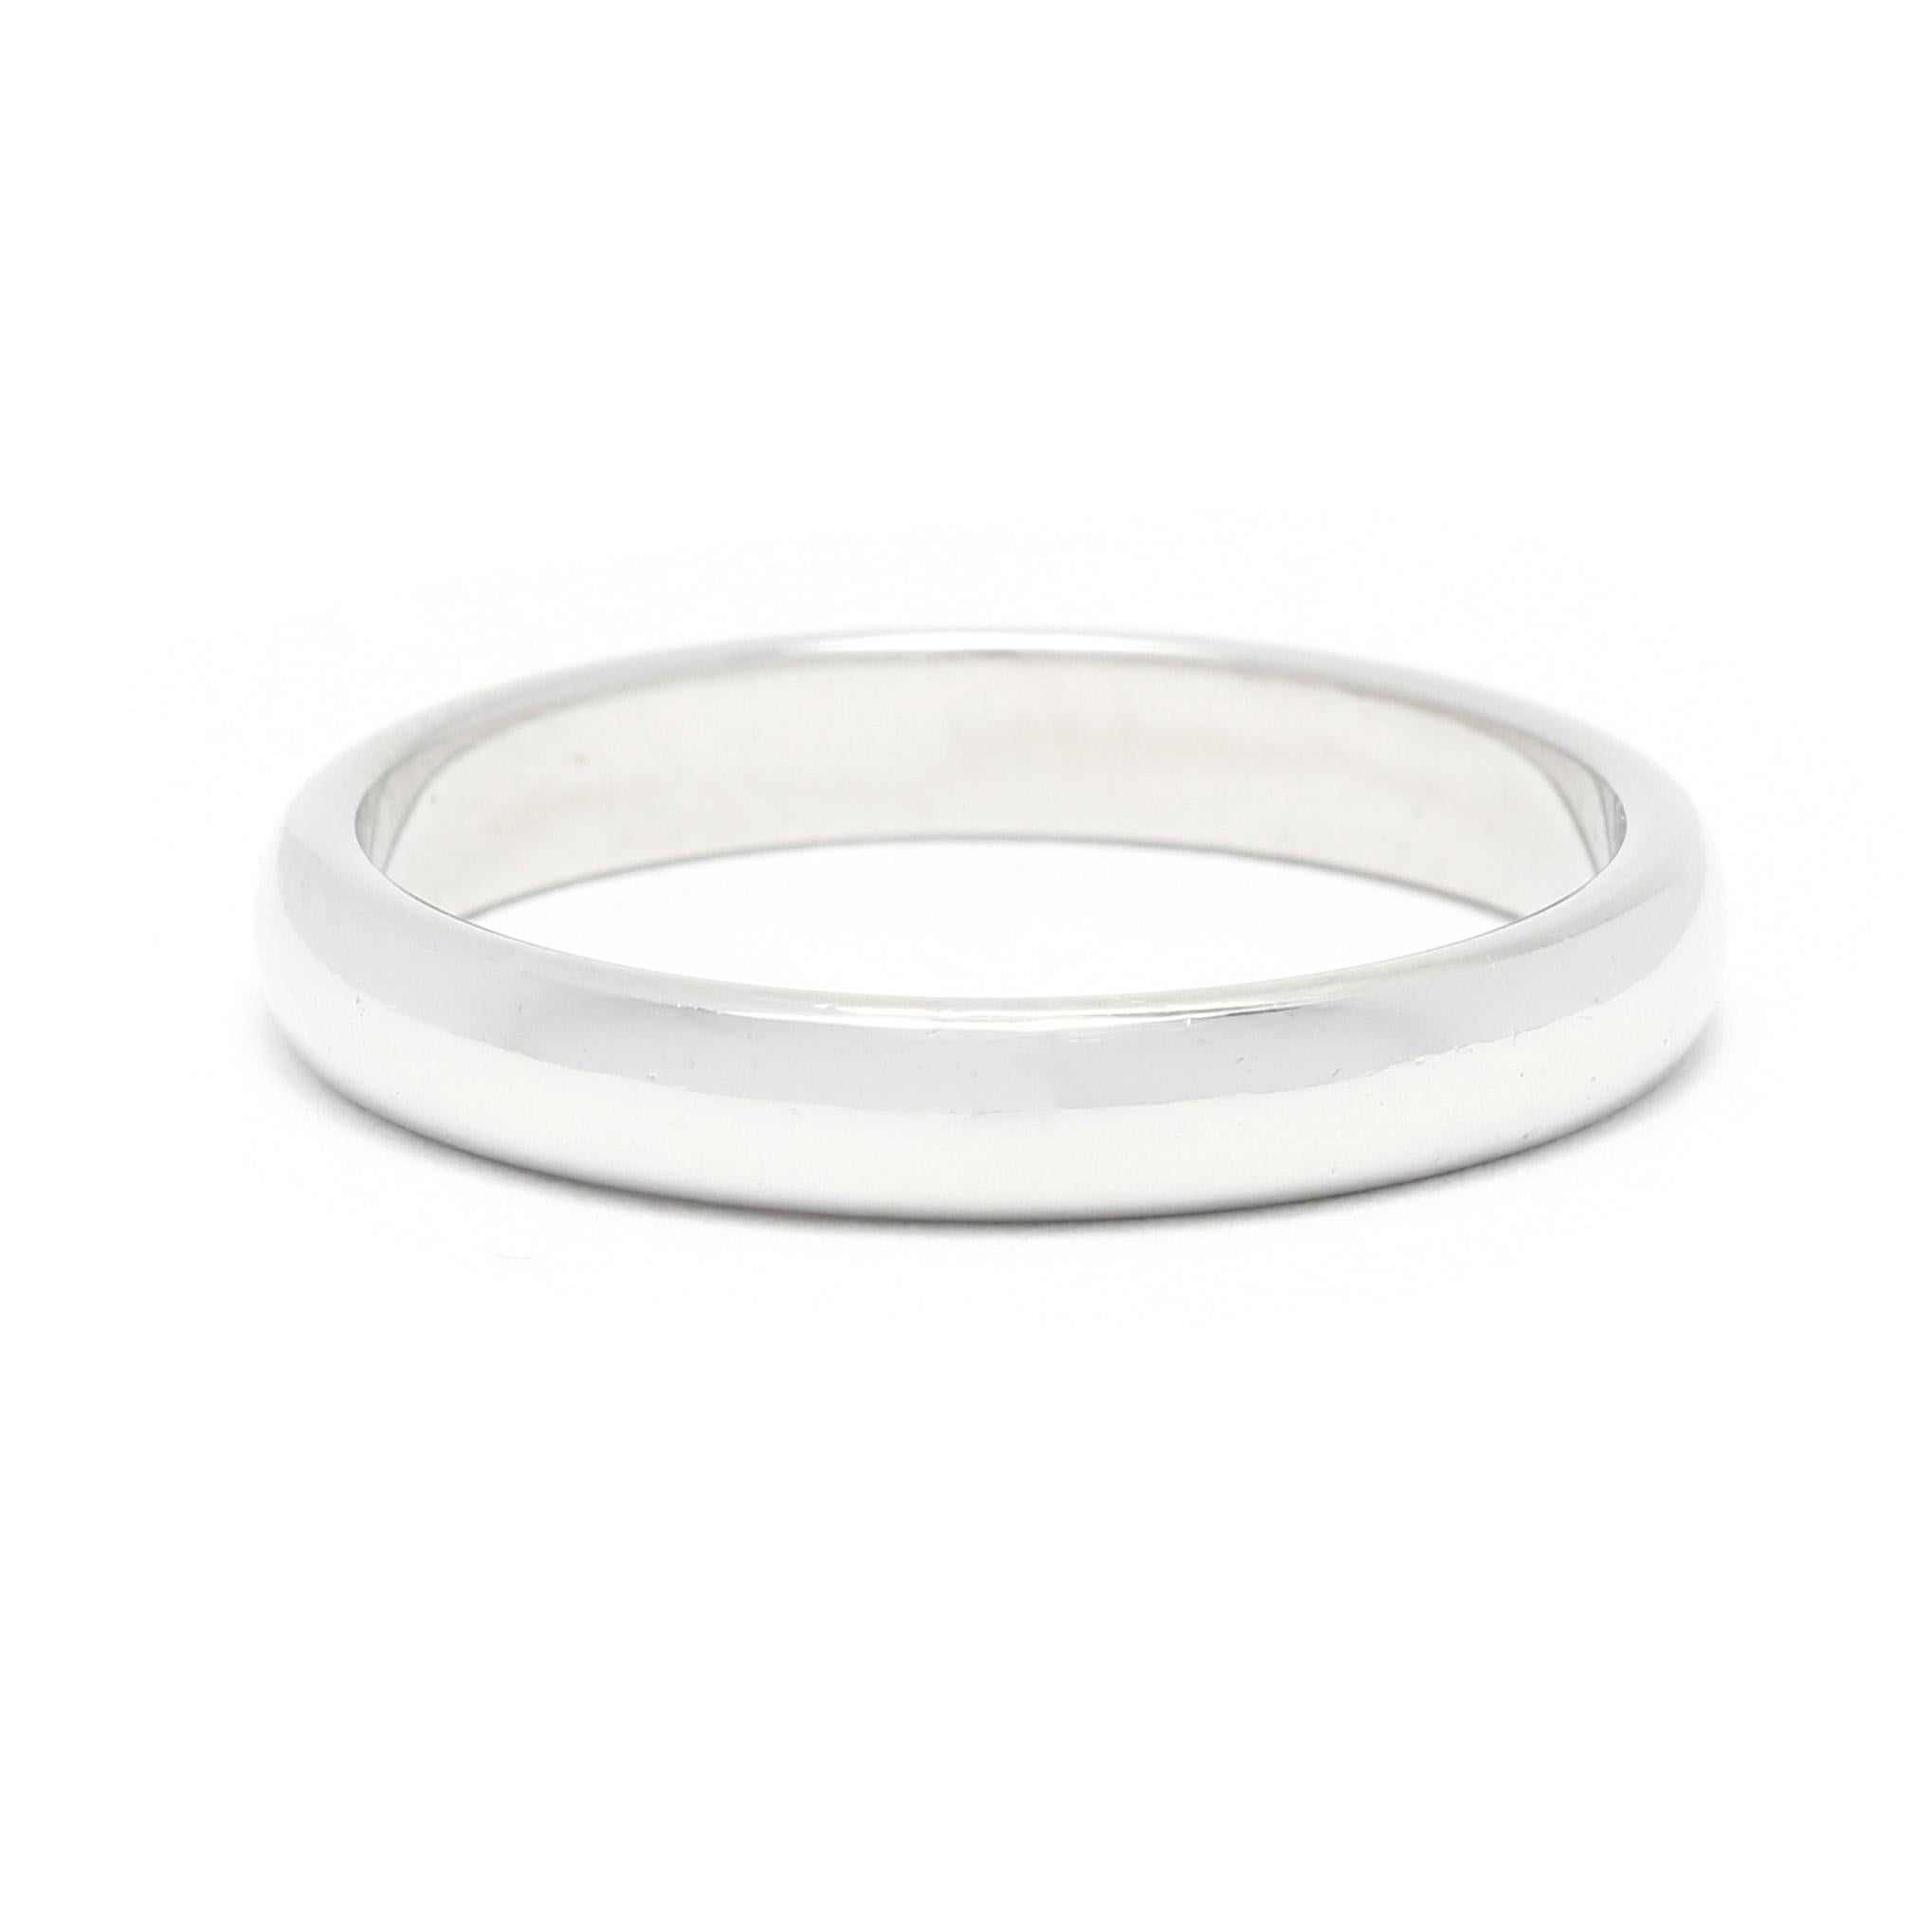 This sleek and stylish 2.65mm platinum stackable wedding band is perfect for any occasion. Crafted from premium, durable platinum, the ring has a classic, timeless appeal. Its slim, plain design makes it an ideal choice for those looking for a